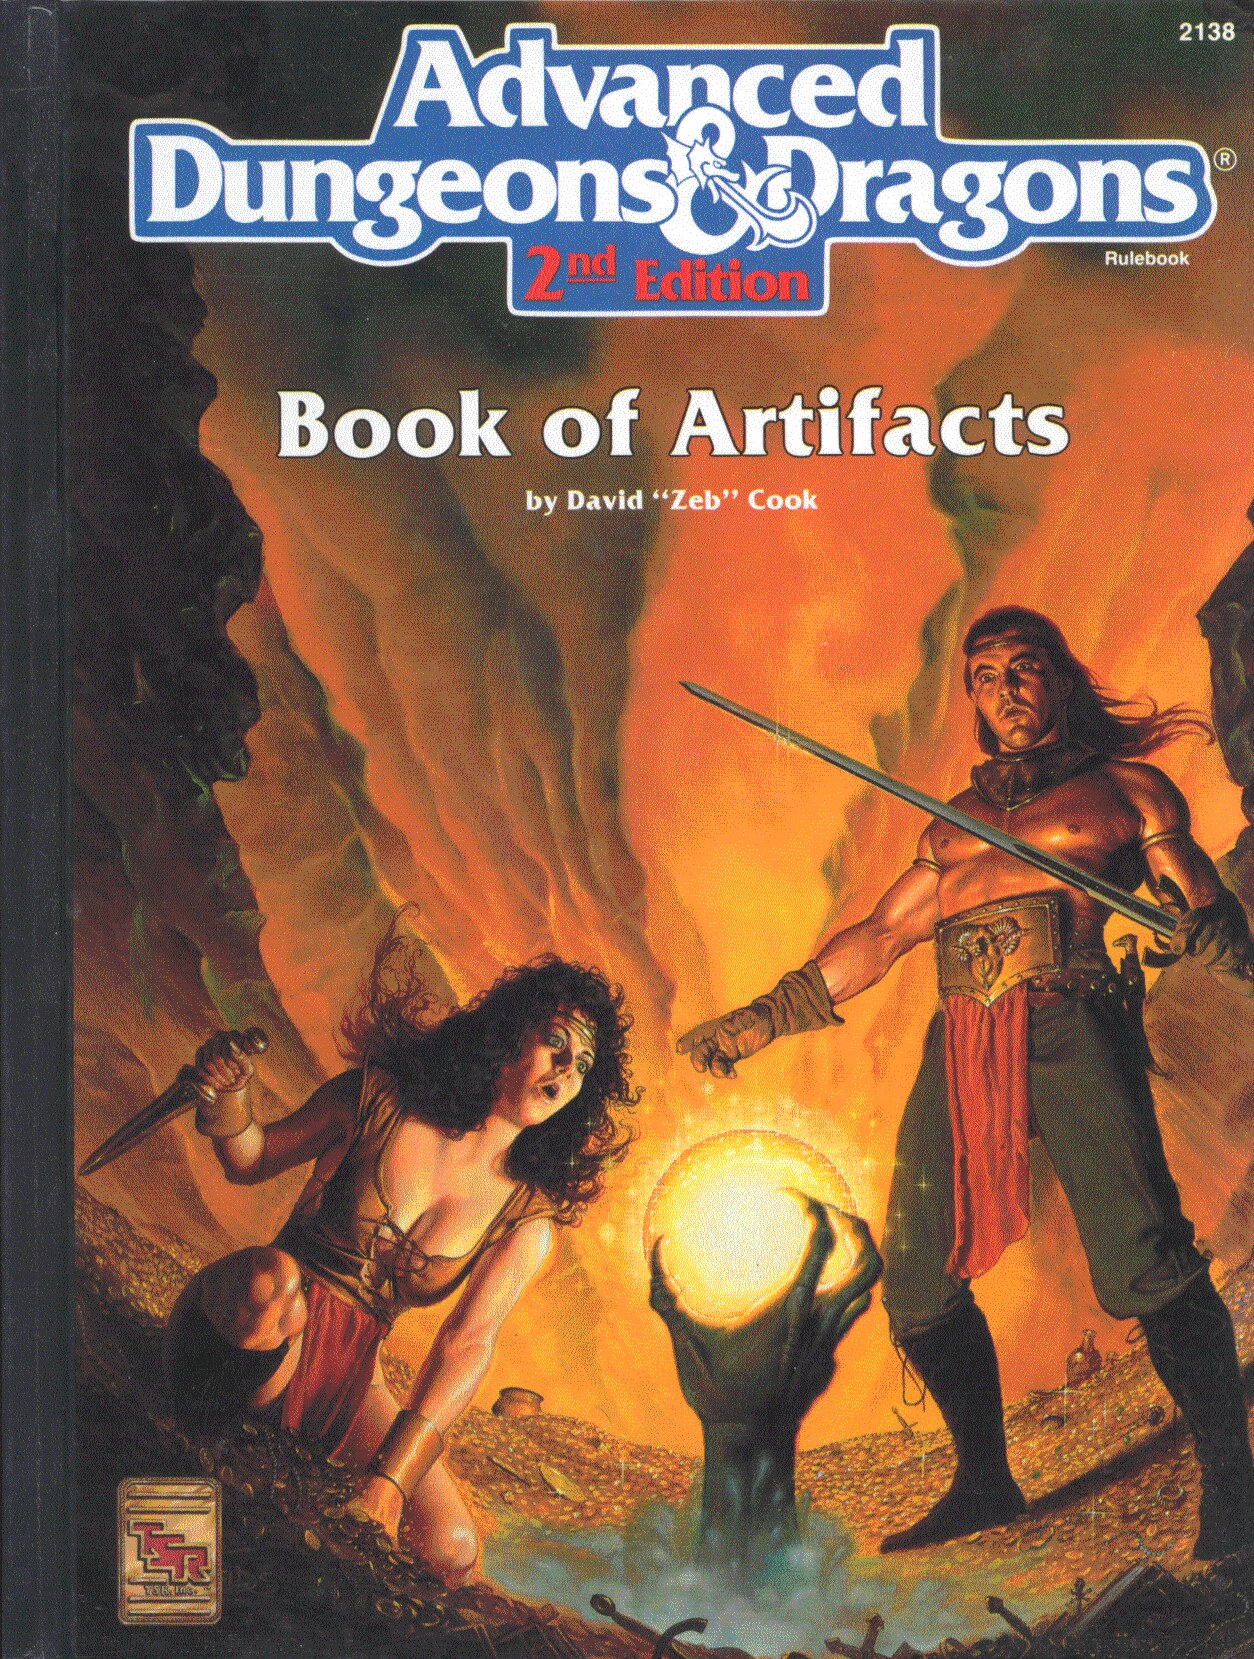 2138 The Book of Artifacts